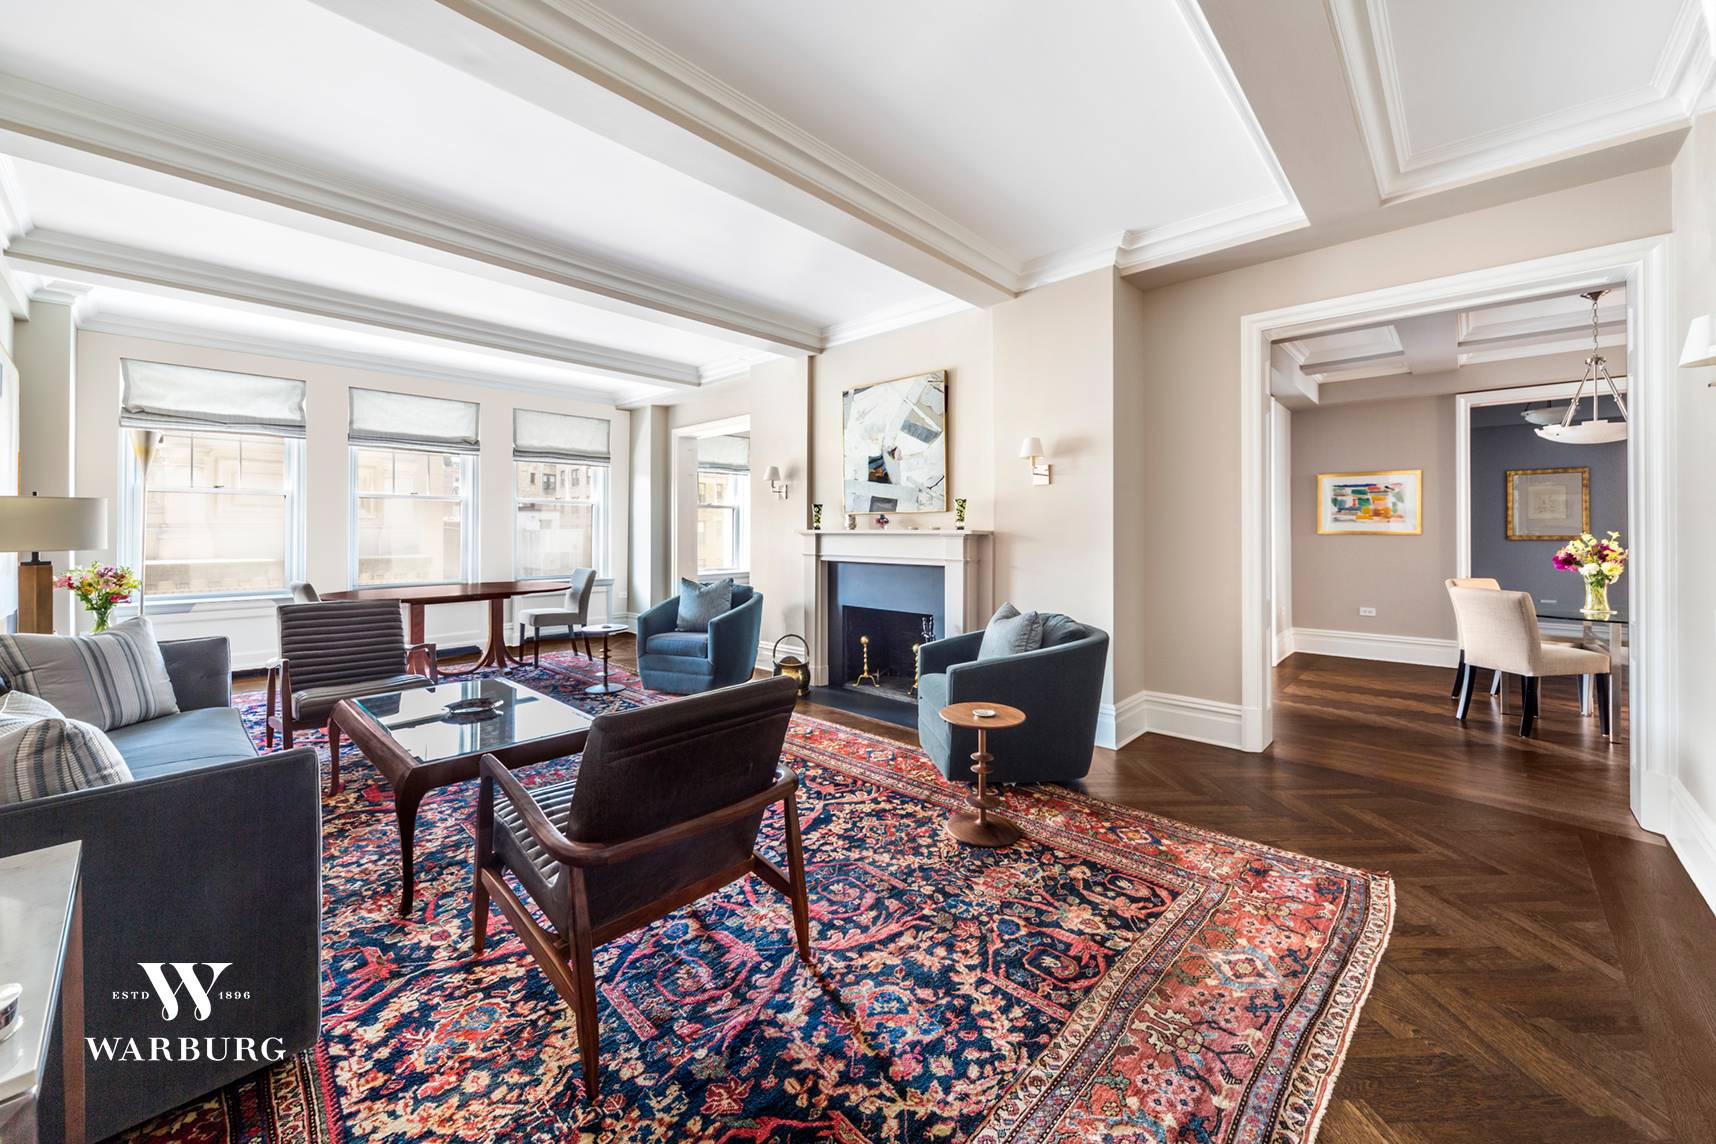 Rare opportunity to own an entirely renovated and move in ready three bedroom apartment in one of the most sought after, white glove buildings on Central Park West.